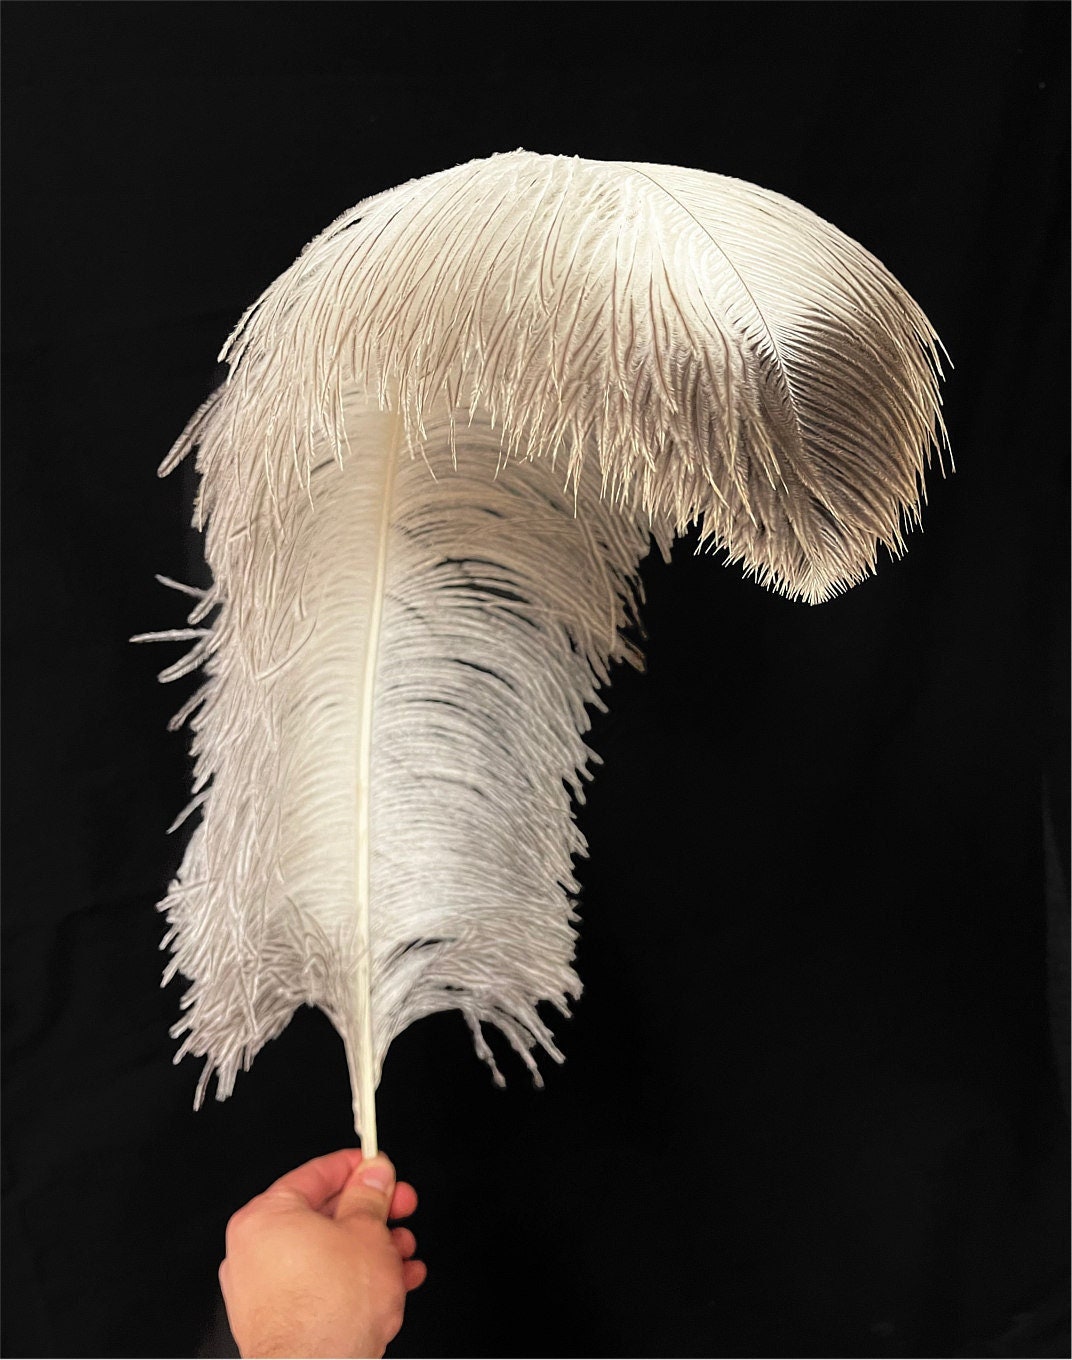 BULK 1/2lb Ostrich Feather Tail Plumes 15-20 (White) for Sale Online